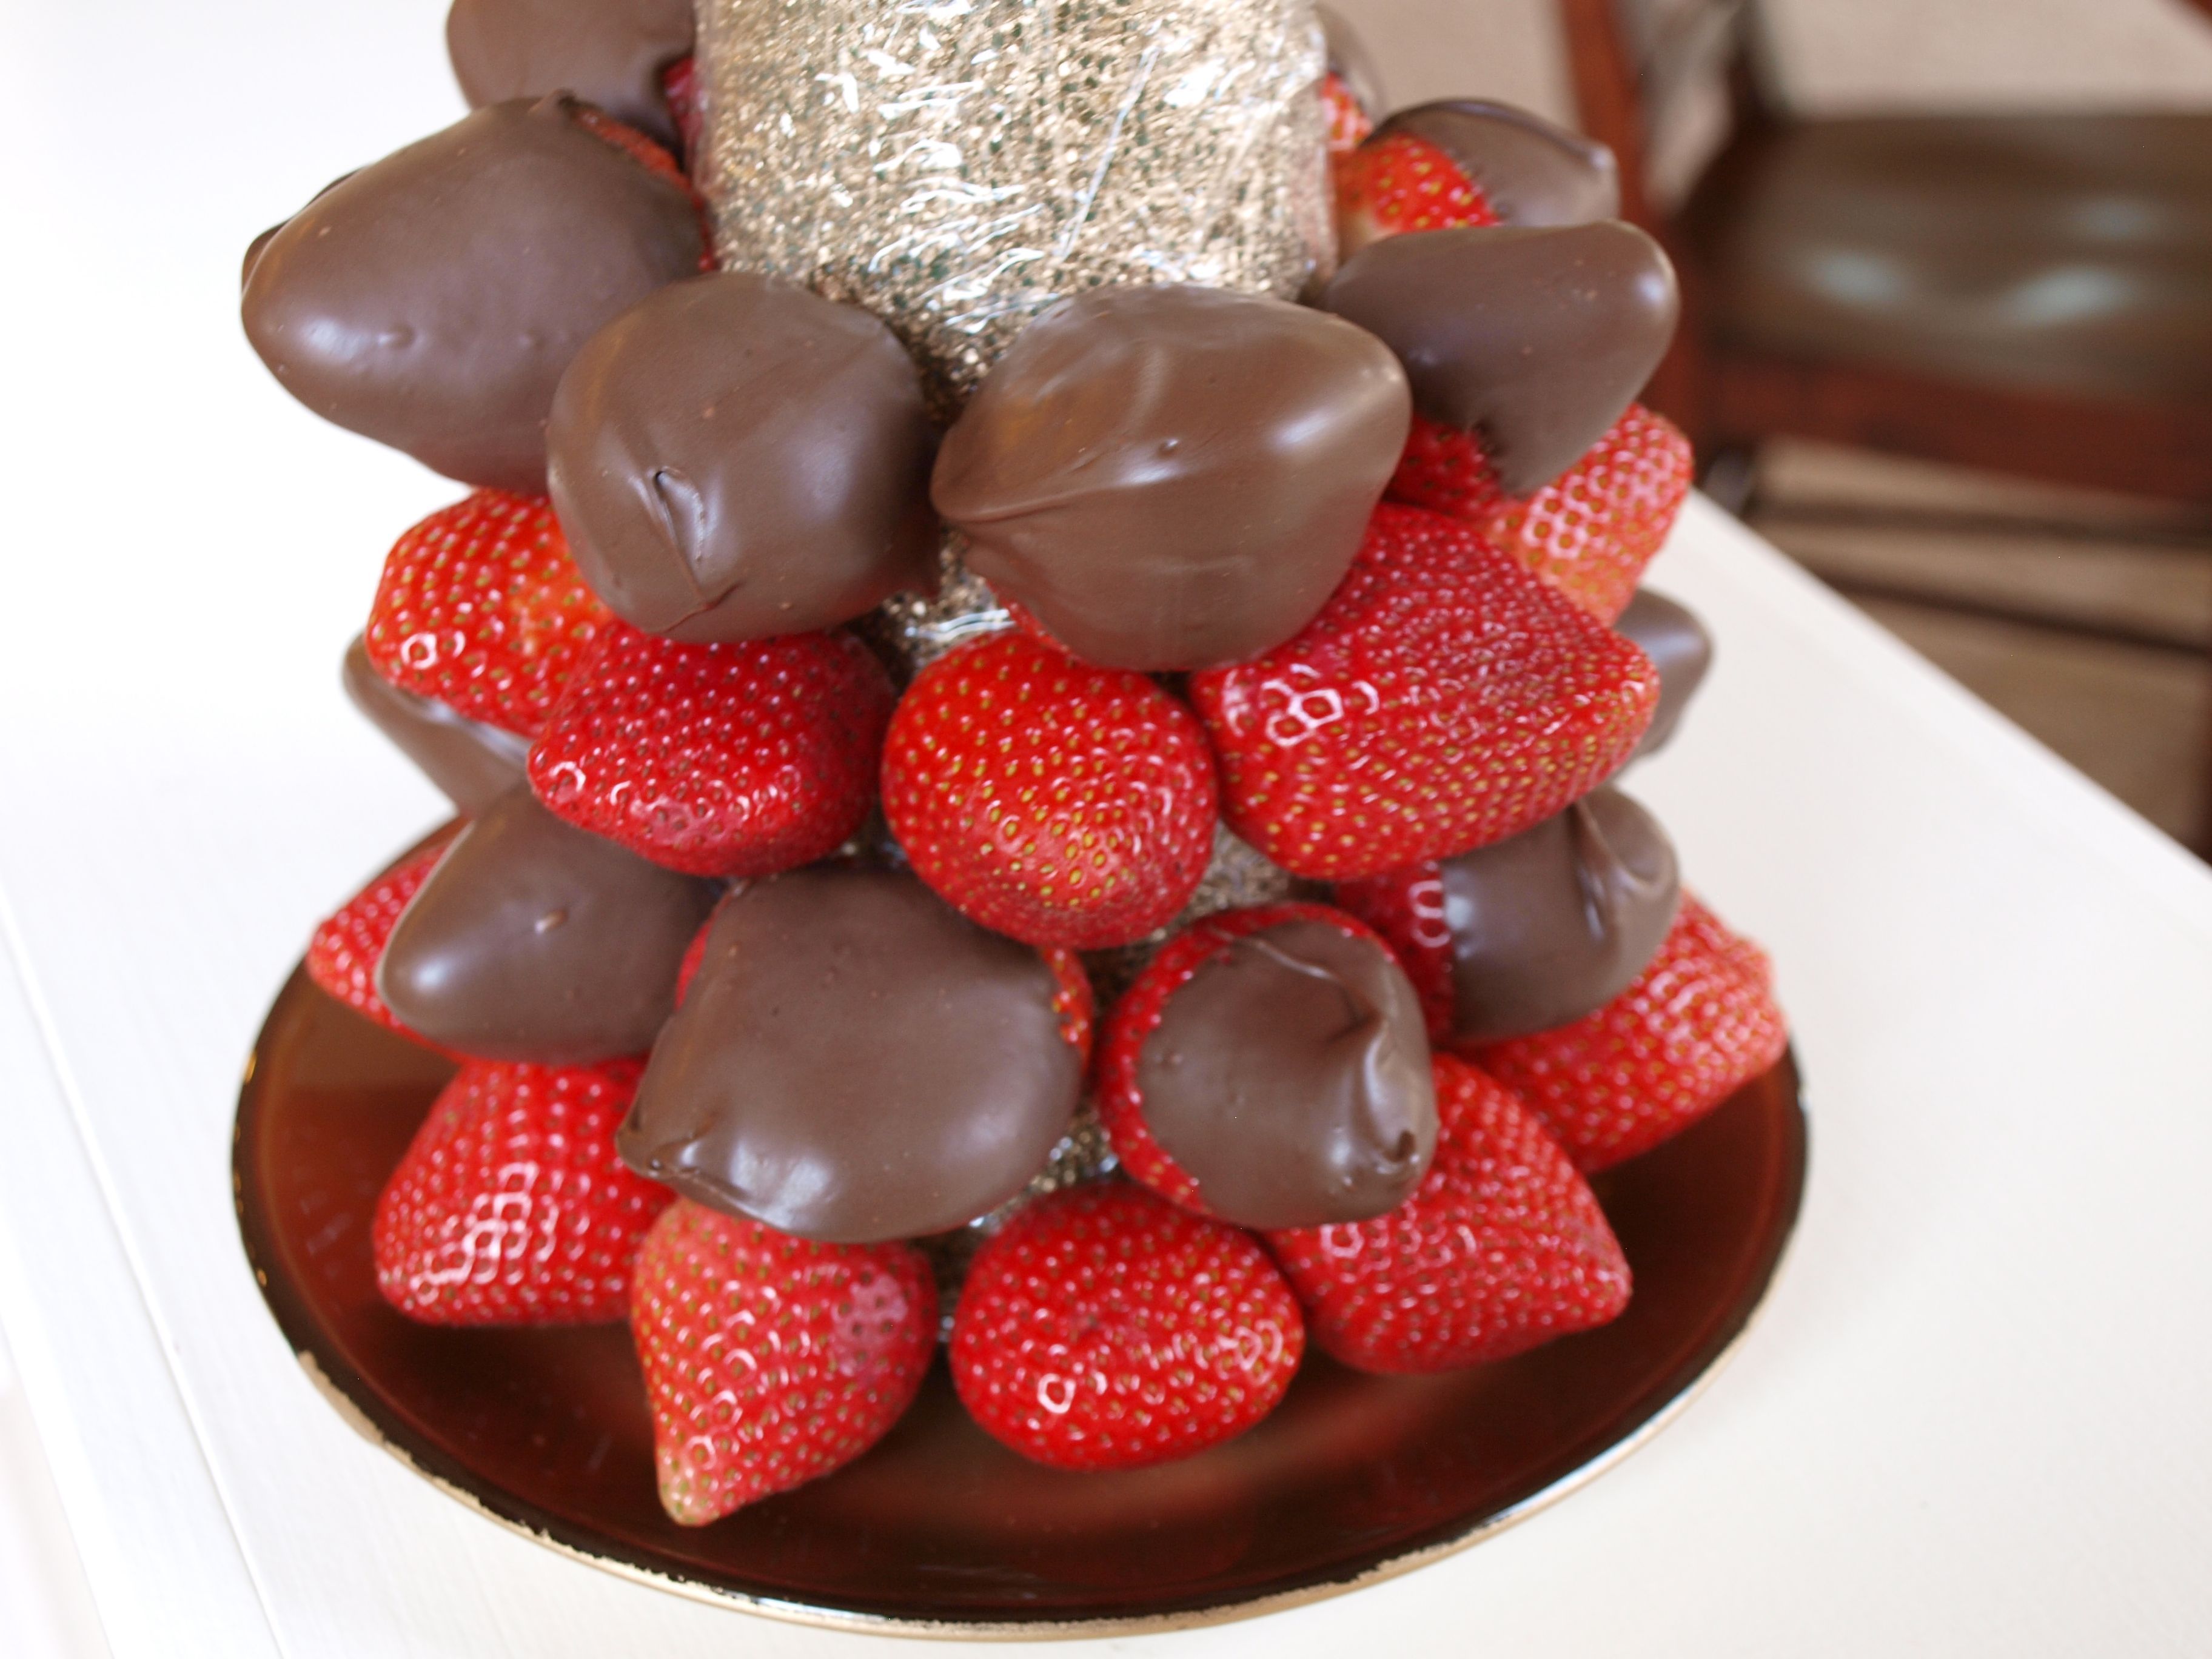 6. Continue alternating rows of strawberries -   How to Create a Chocolate Tree